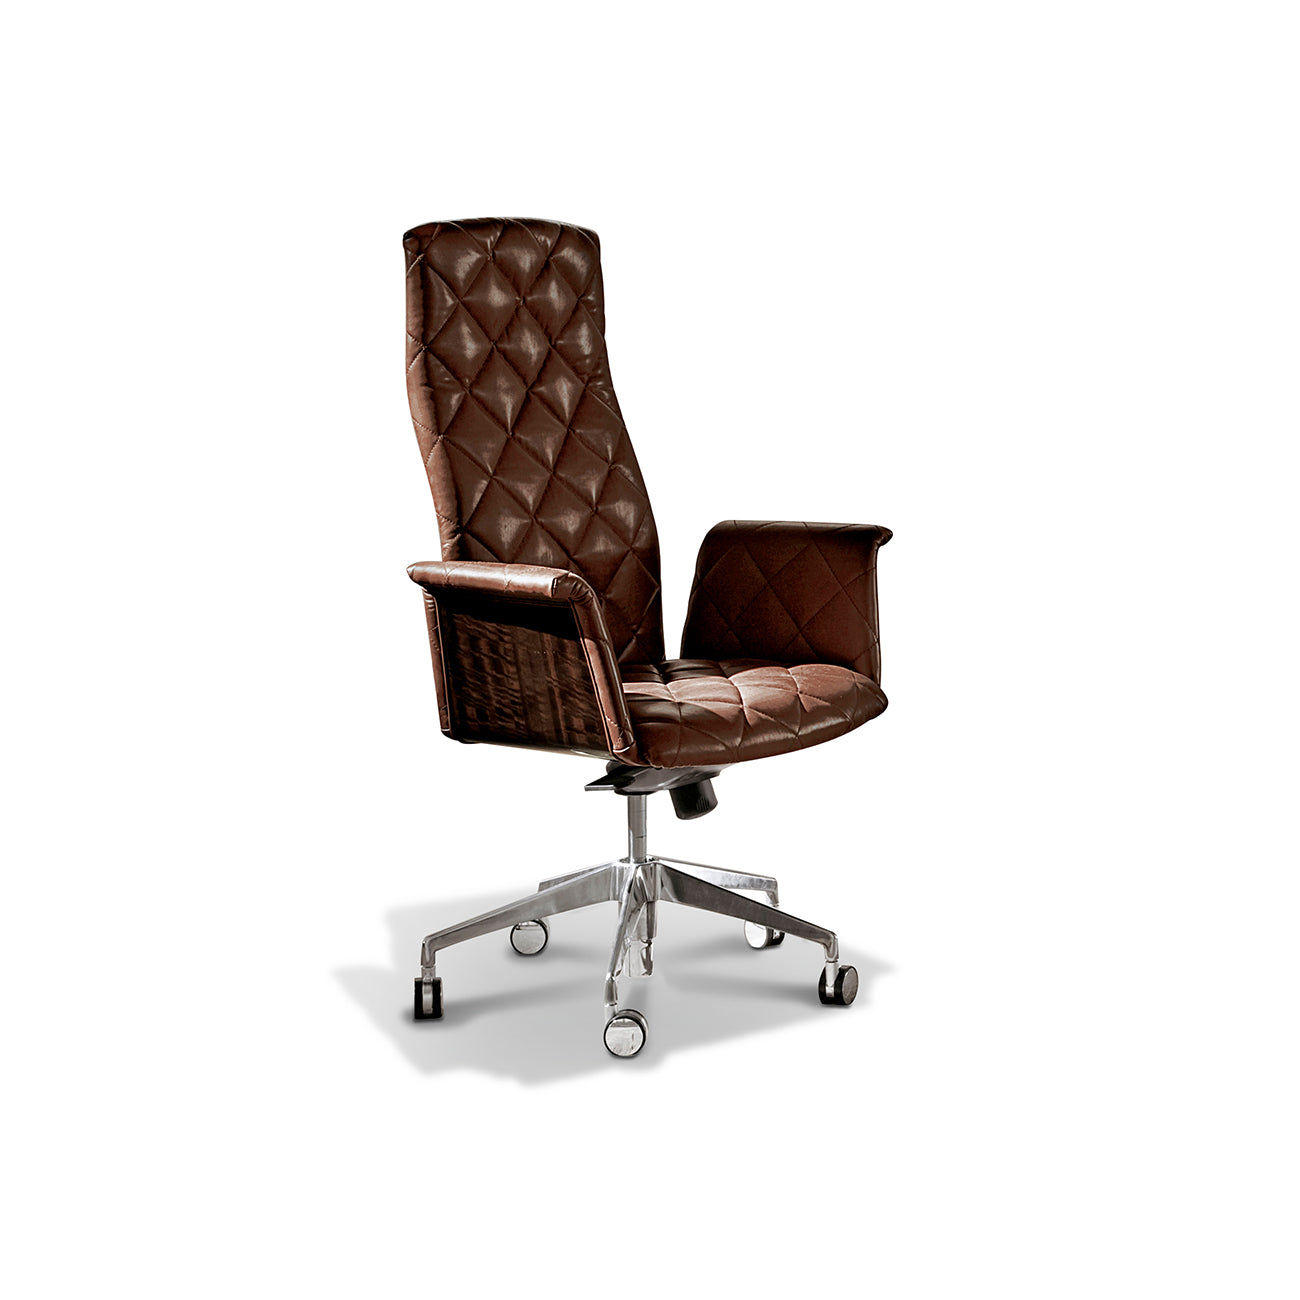 Vogue office chair